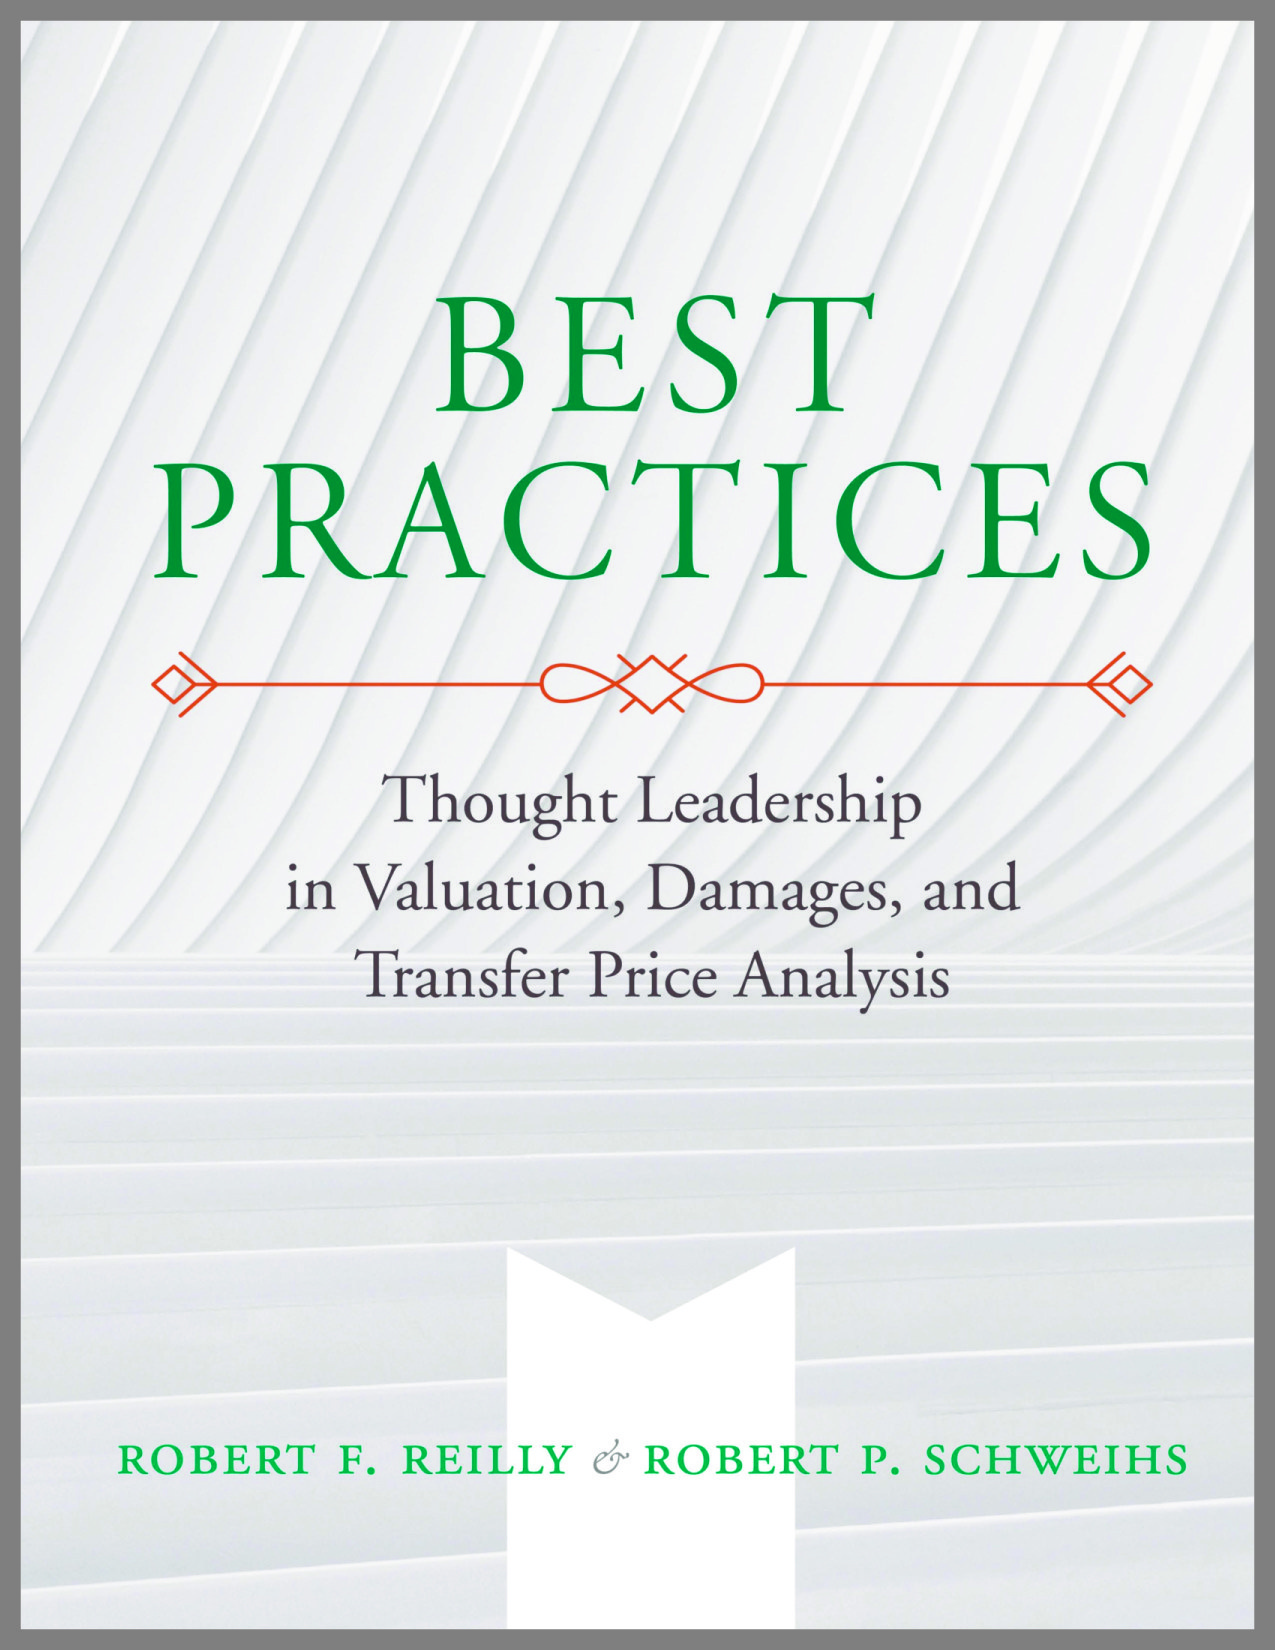 Best Practices – Thought Leadership in Valuation, Damages, and Transfer Price Analysis